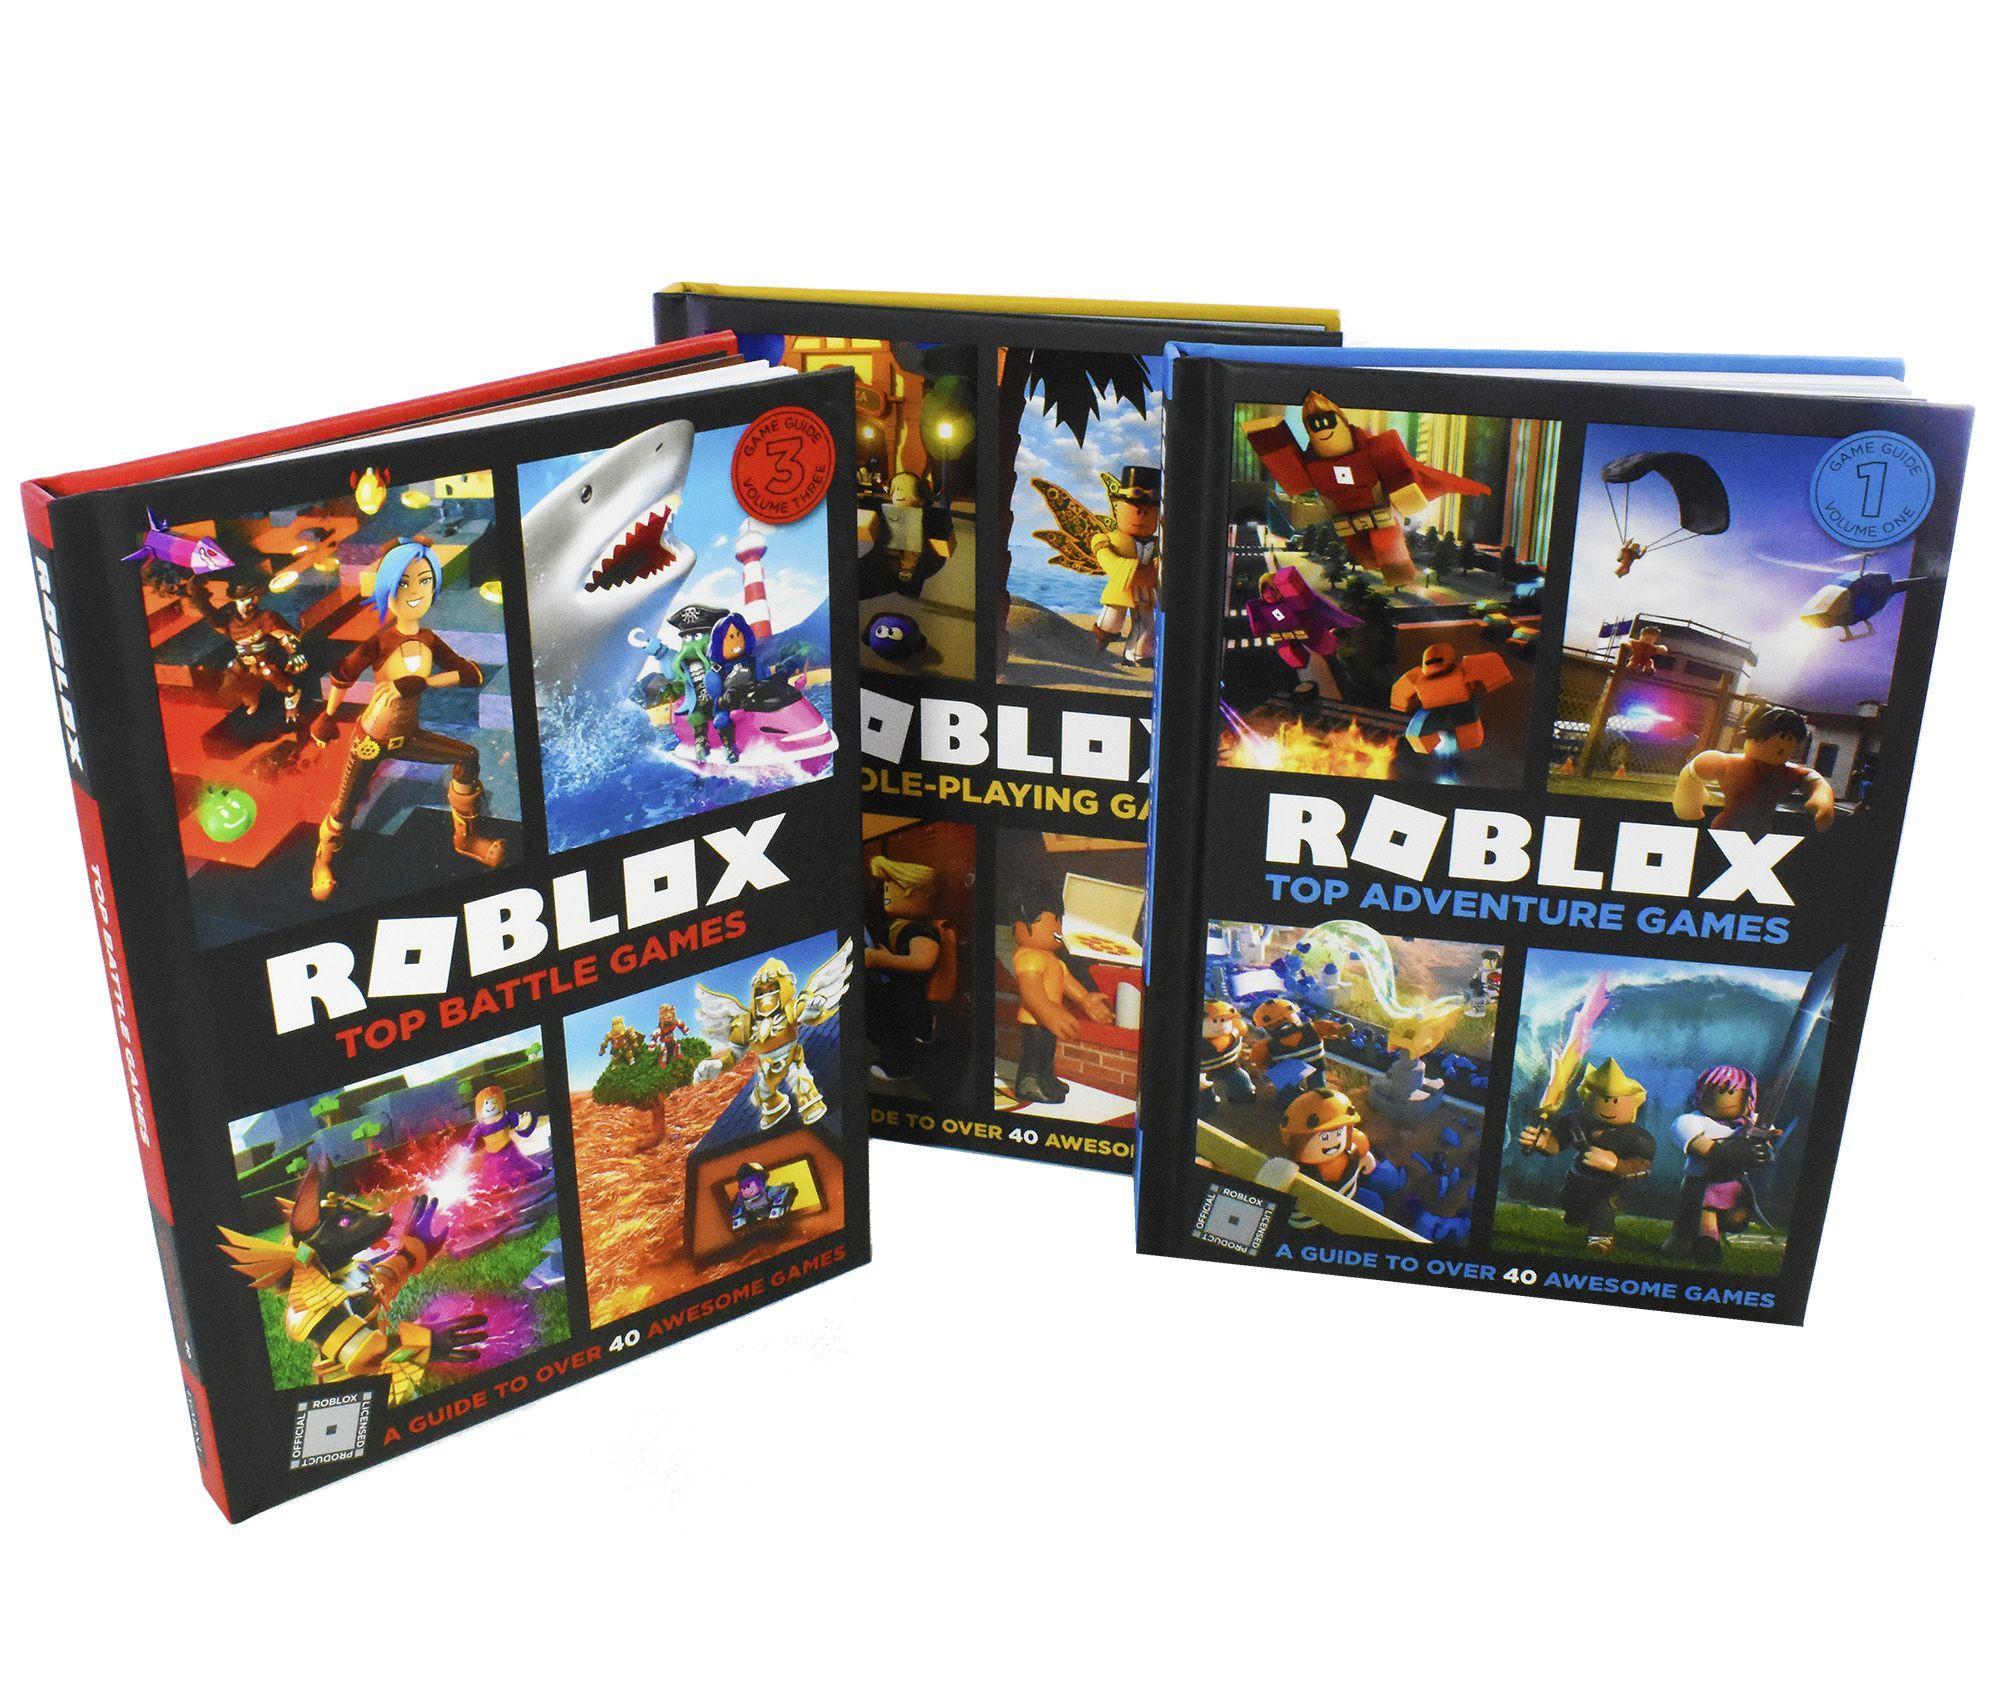 Roblox Ultimate Guide 3 Books Children Collection Hardback By David Jagneaux St Stephens Books - roblox childrens chapter books